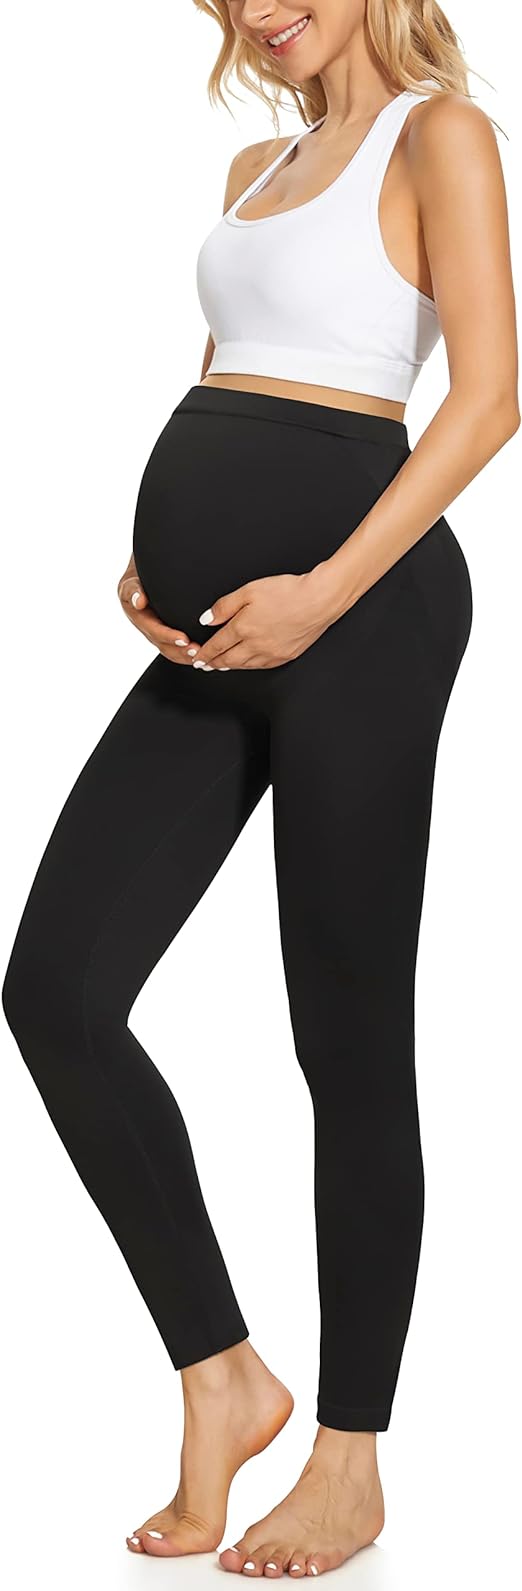 Hi Clasmix Maternity Leggings Over The Belly Butt Lift - Buttery Soft Non-See-Through Workout Pregnancy Leggings